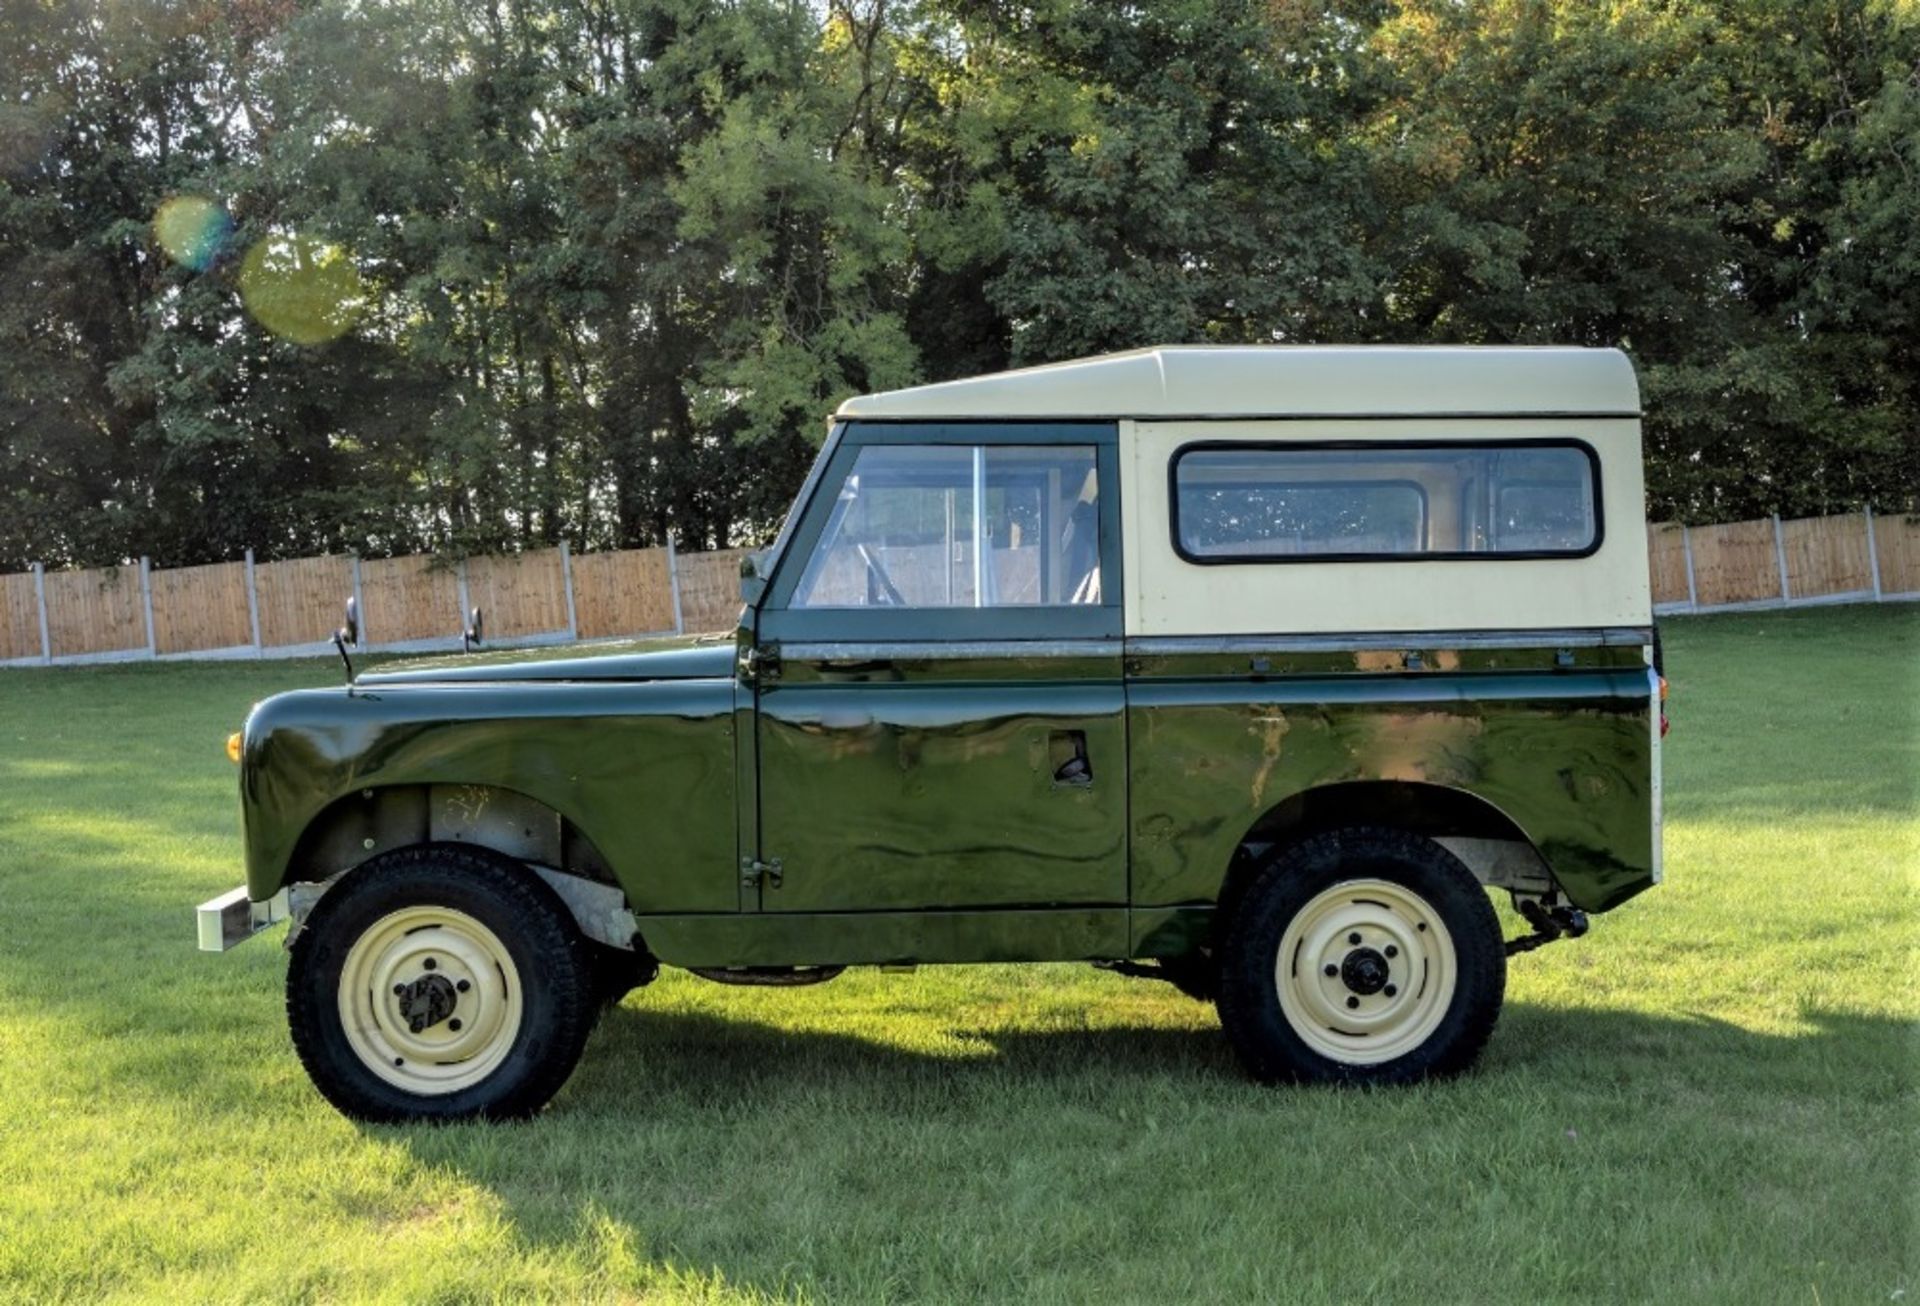 1968 LAND-ROVER SERIES IIA 88” LIGHT UTILITY  Registration Number: KTC 834F - Image 8 of 19